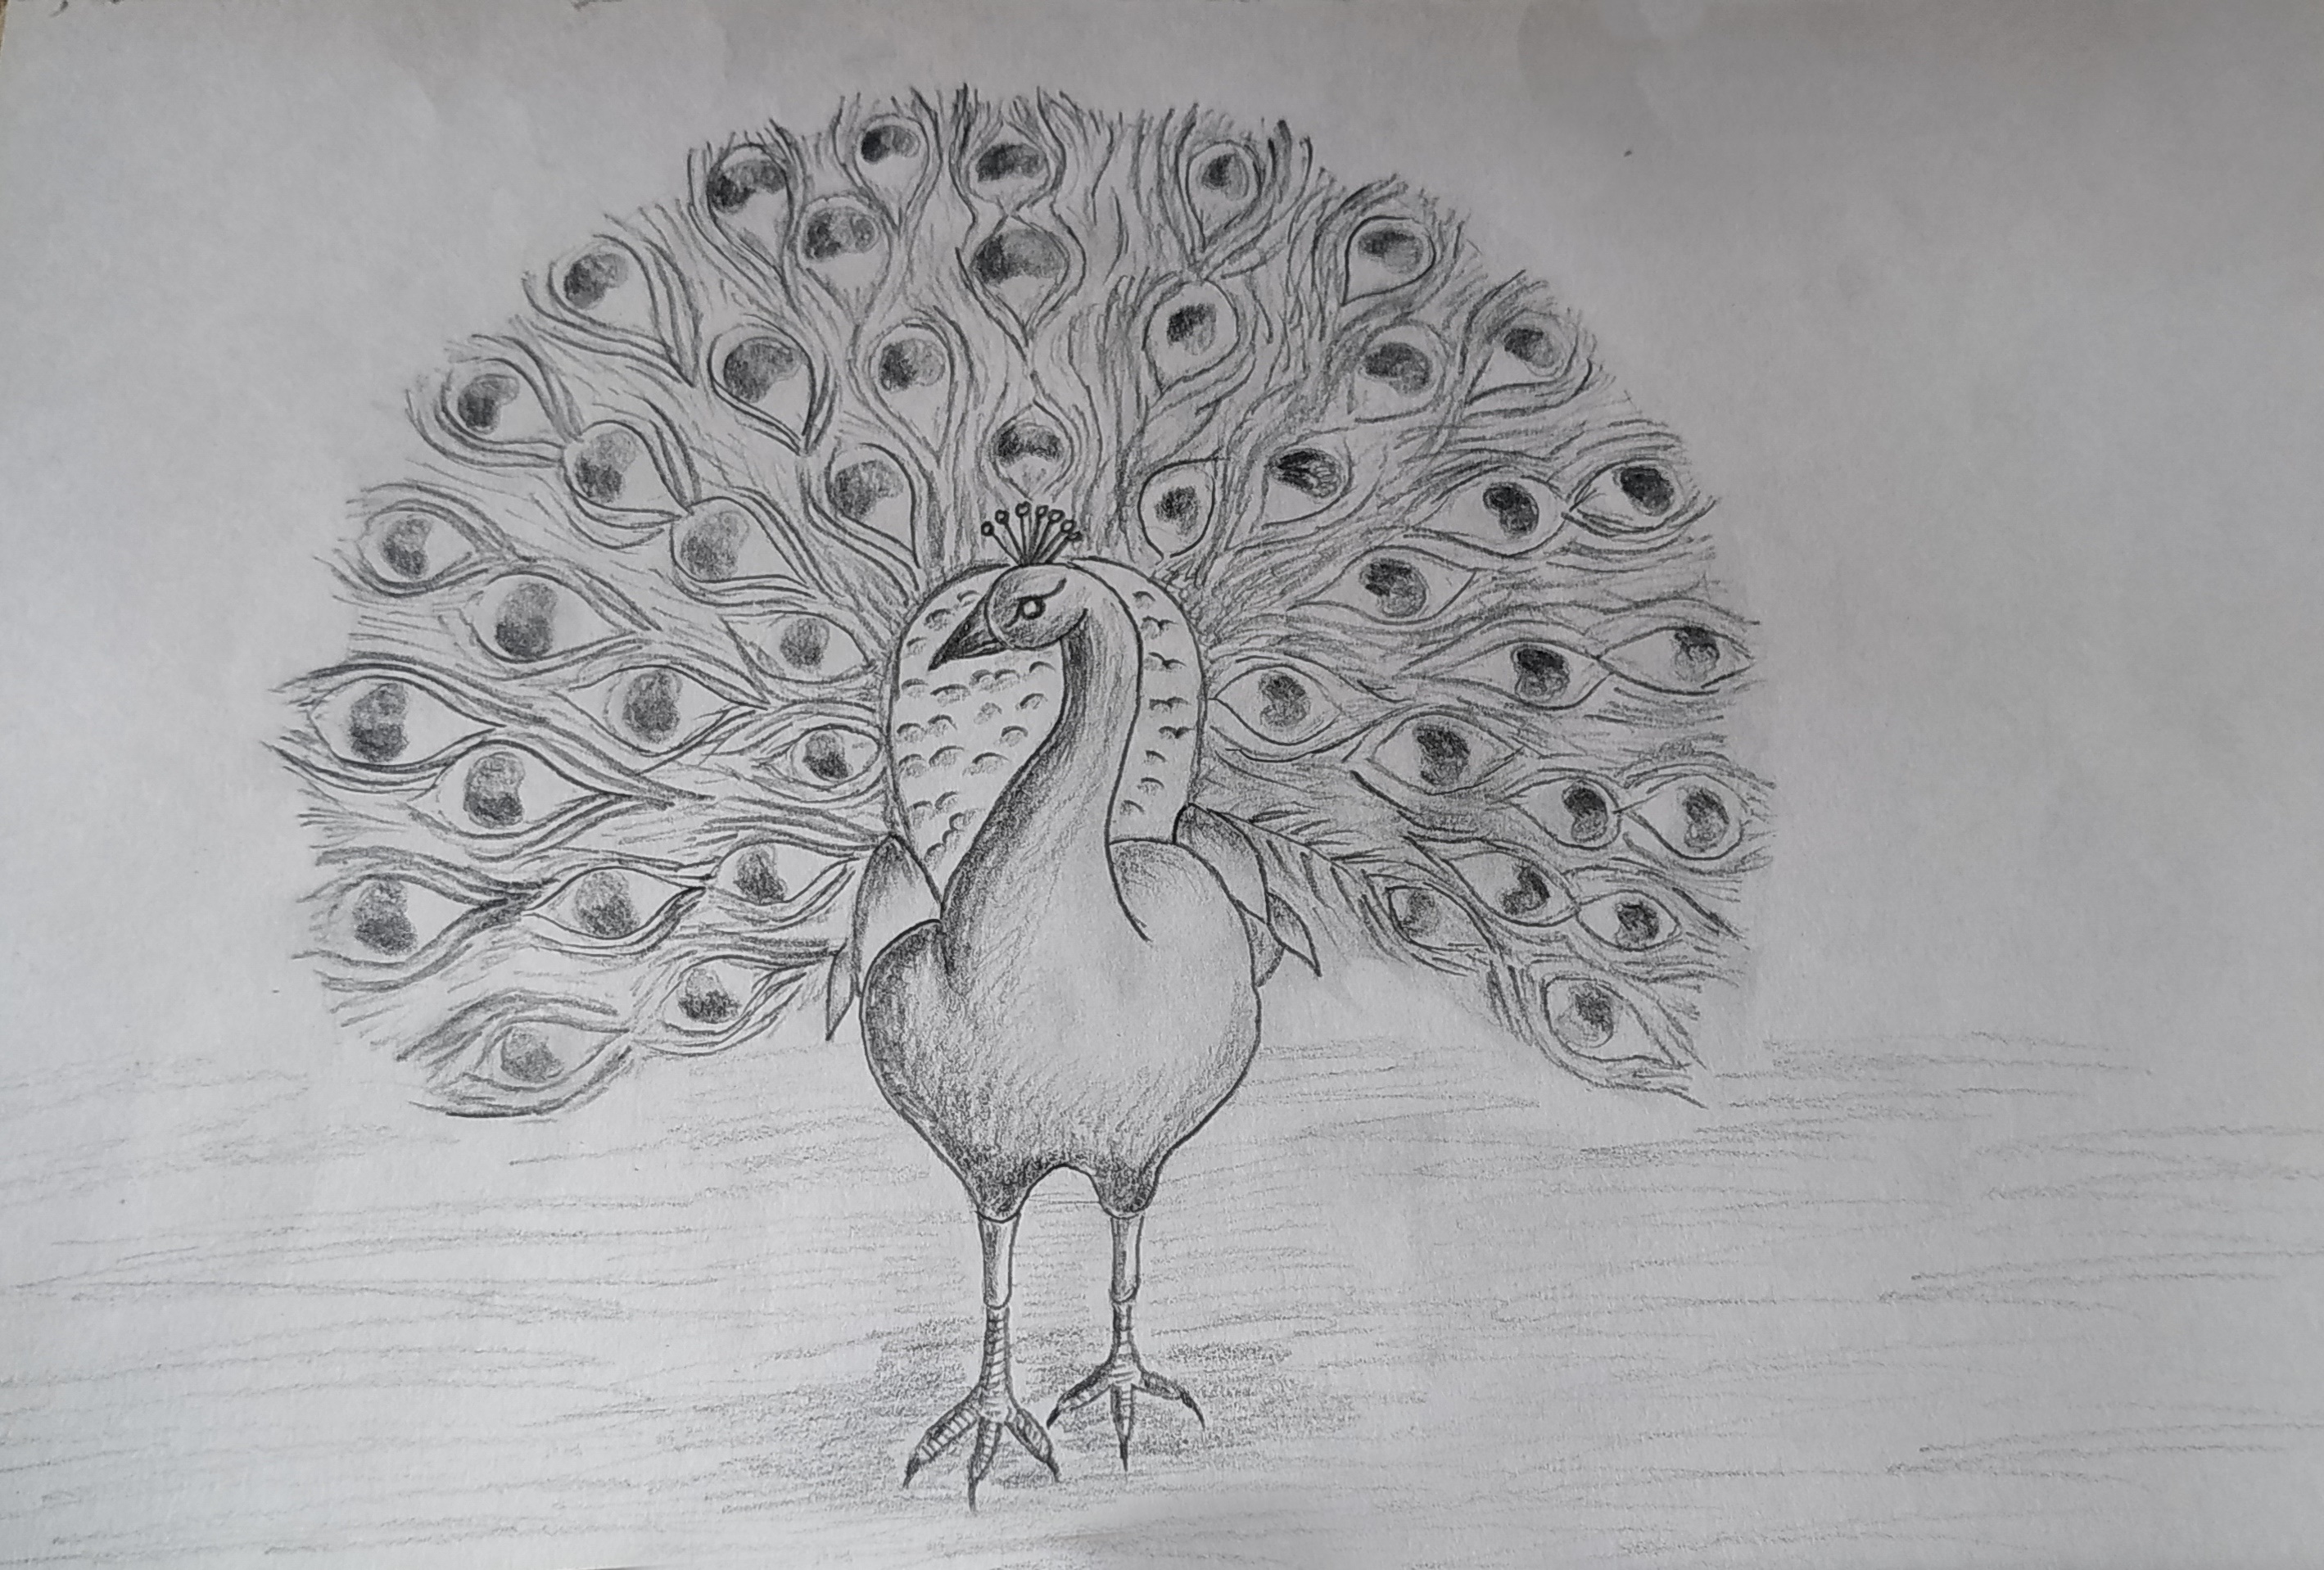 Beautiful Peacock Drawing Easy You Can Draw A Bird Better If You Get